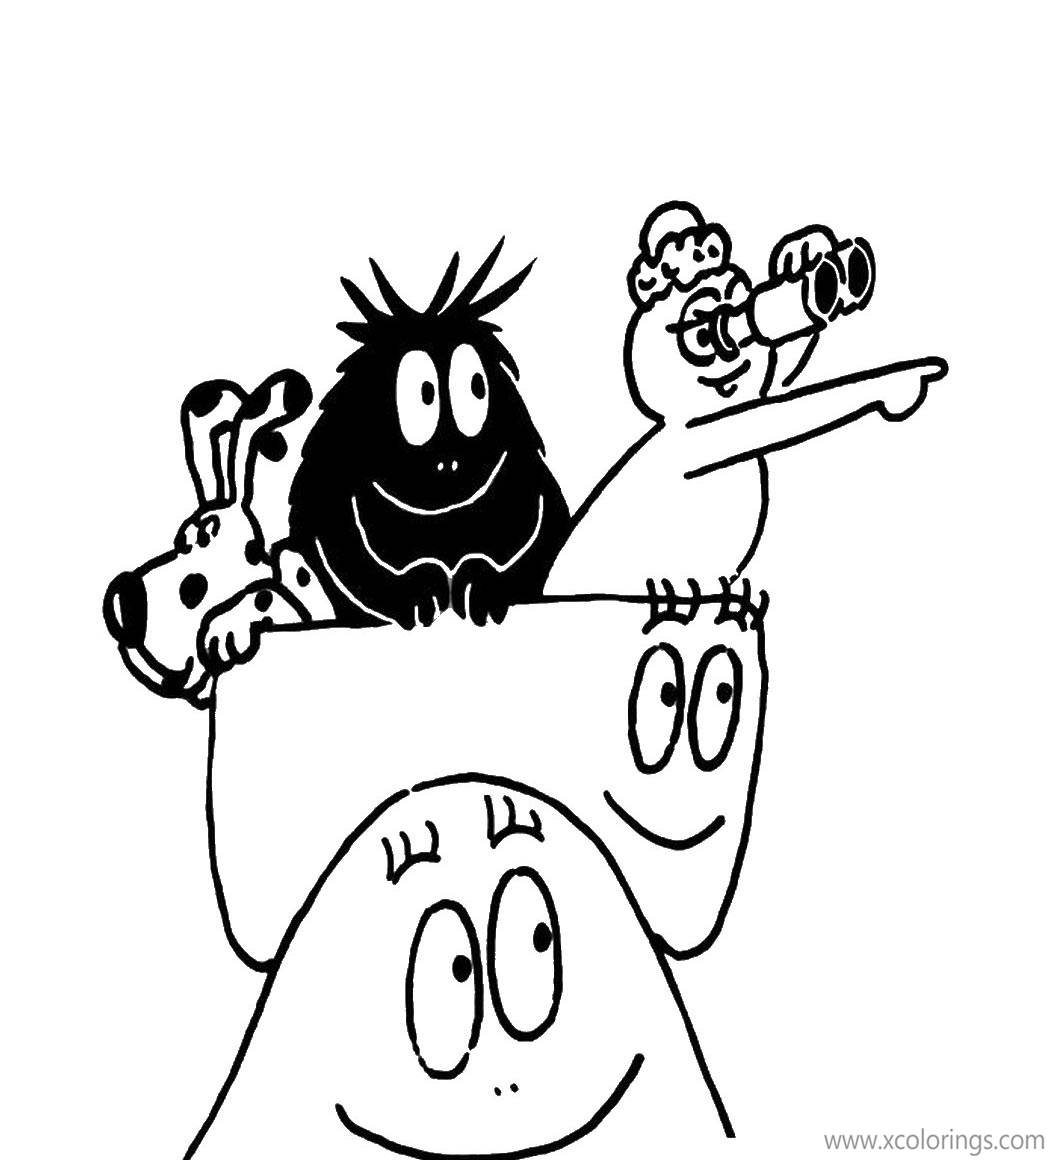 Free Barbapapa Coloring Pages Barbabella with a Telescope printable